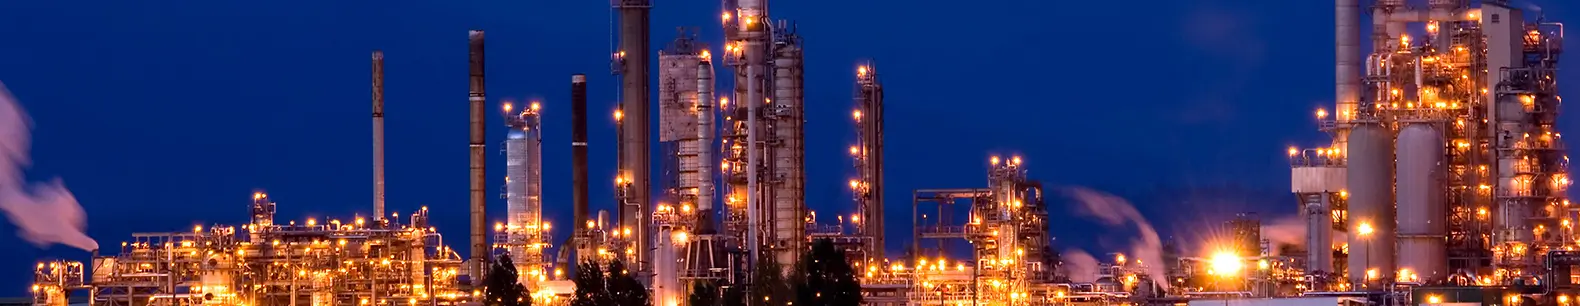 refining-and-petrochemical